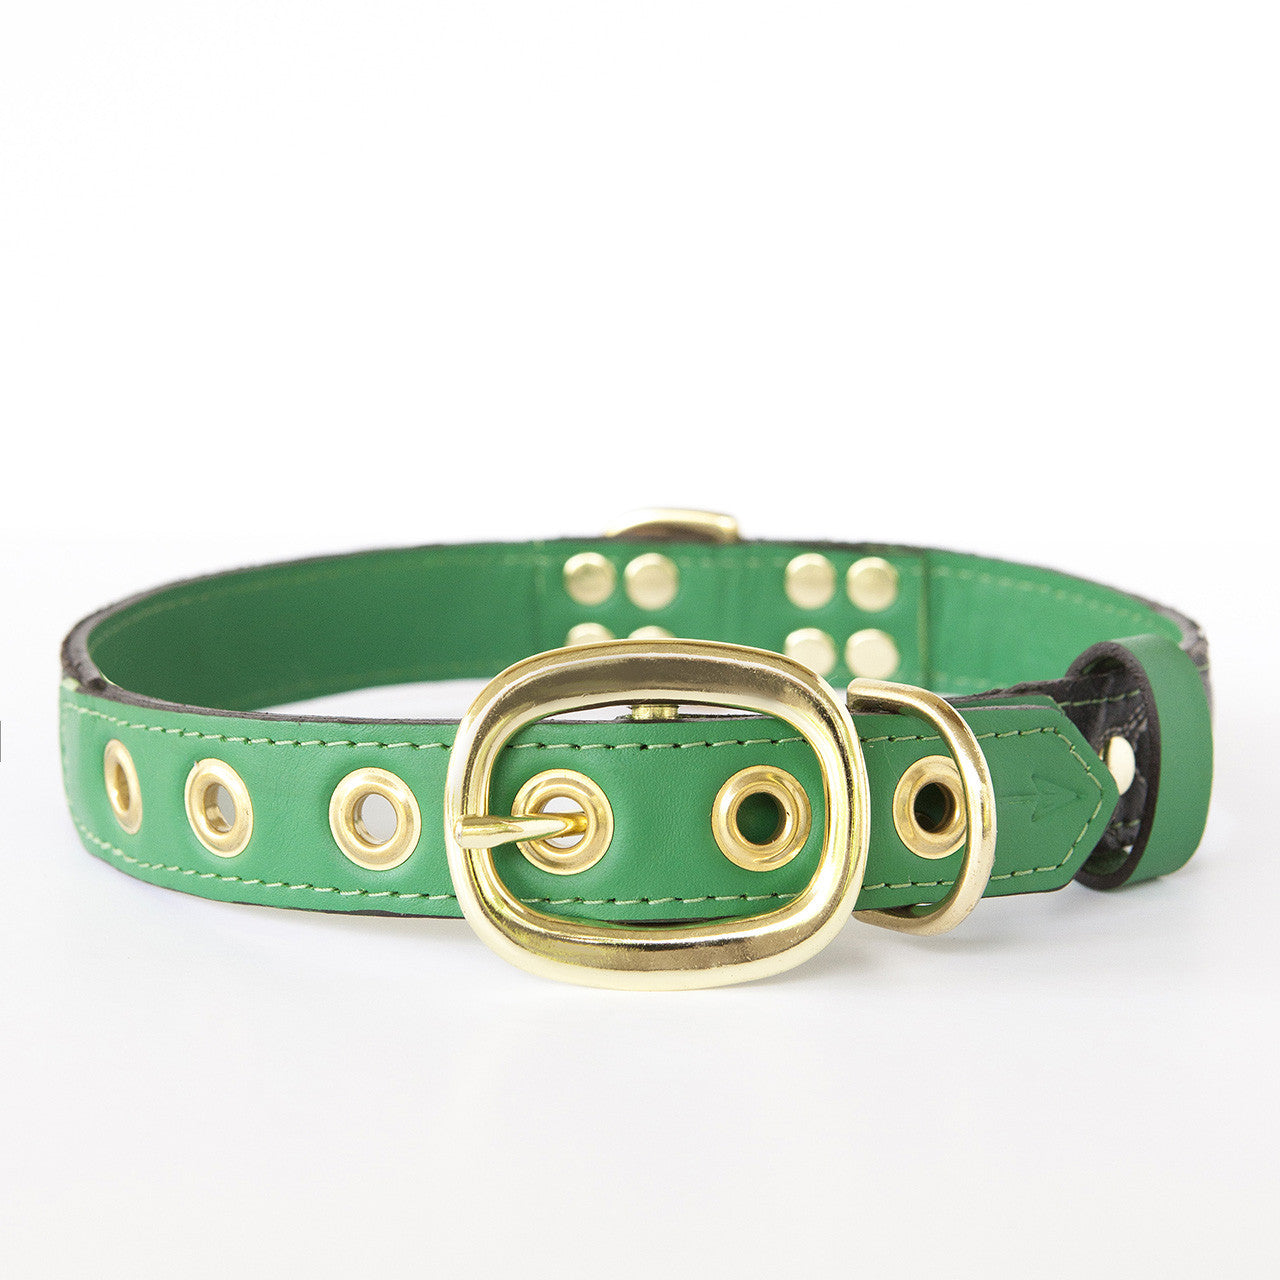 Emerald Green Dog Collar with Black Leather + White Stitching (back view)